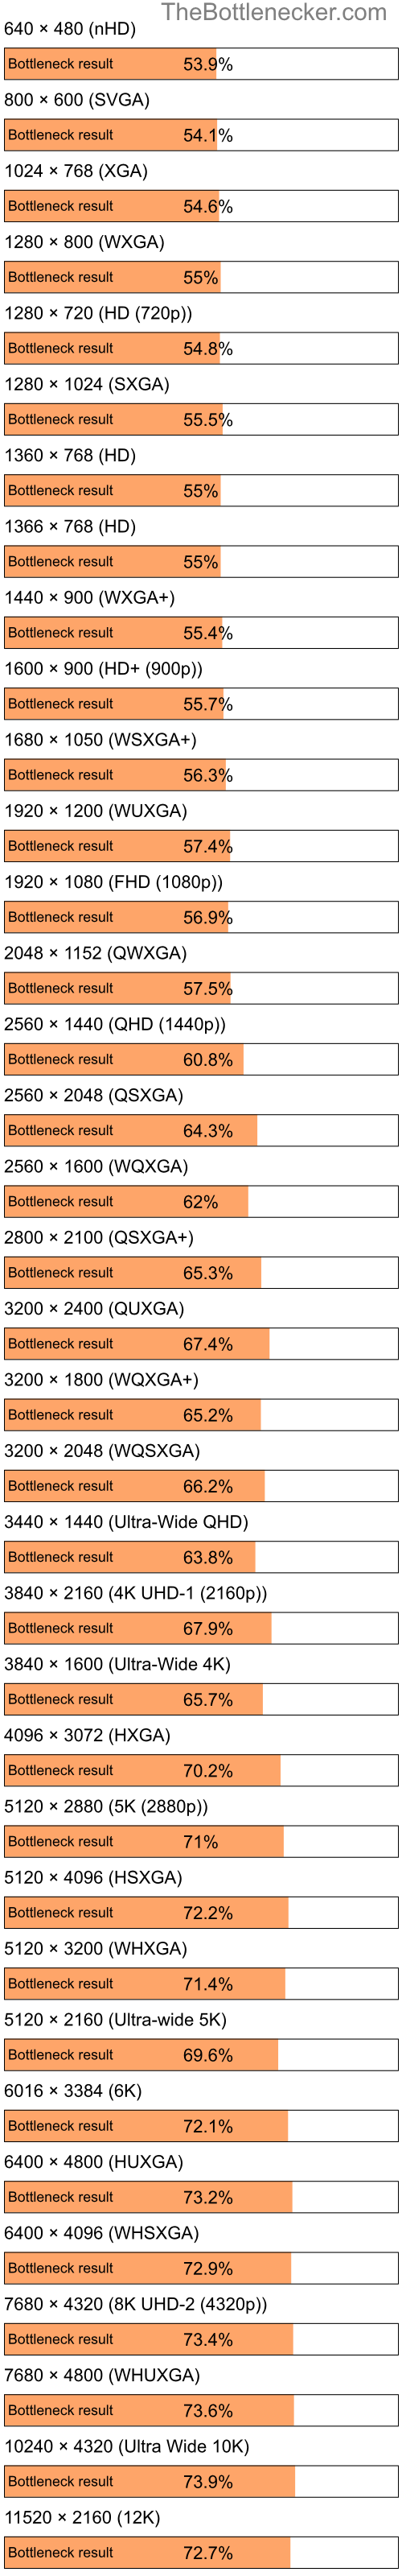 Bottleneck results by resolution for Intel Atom N280 and AMD Mobility Radeon X1700 in Processor Intense Tasks